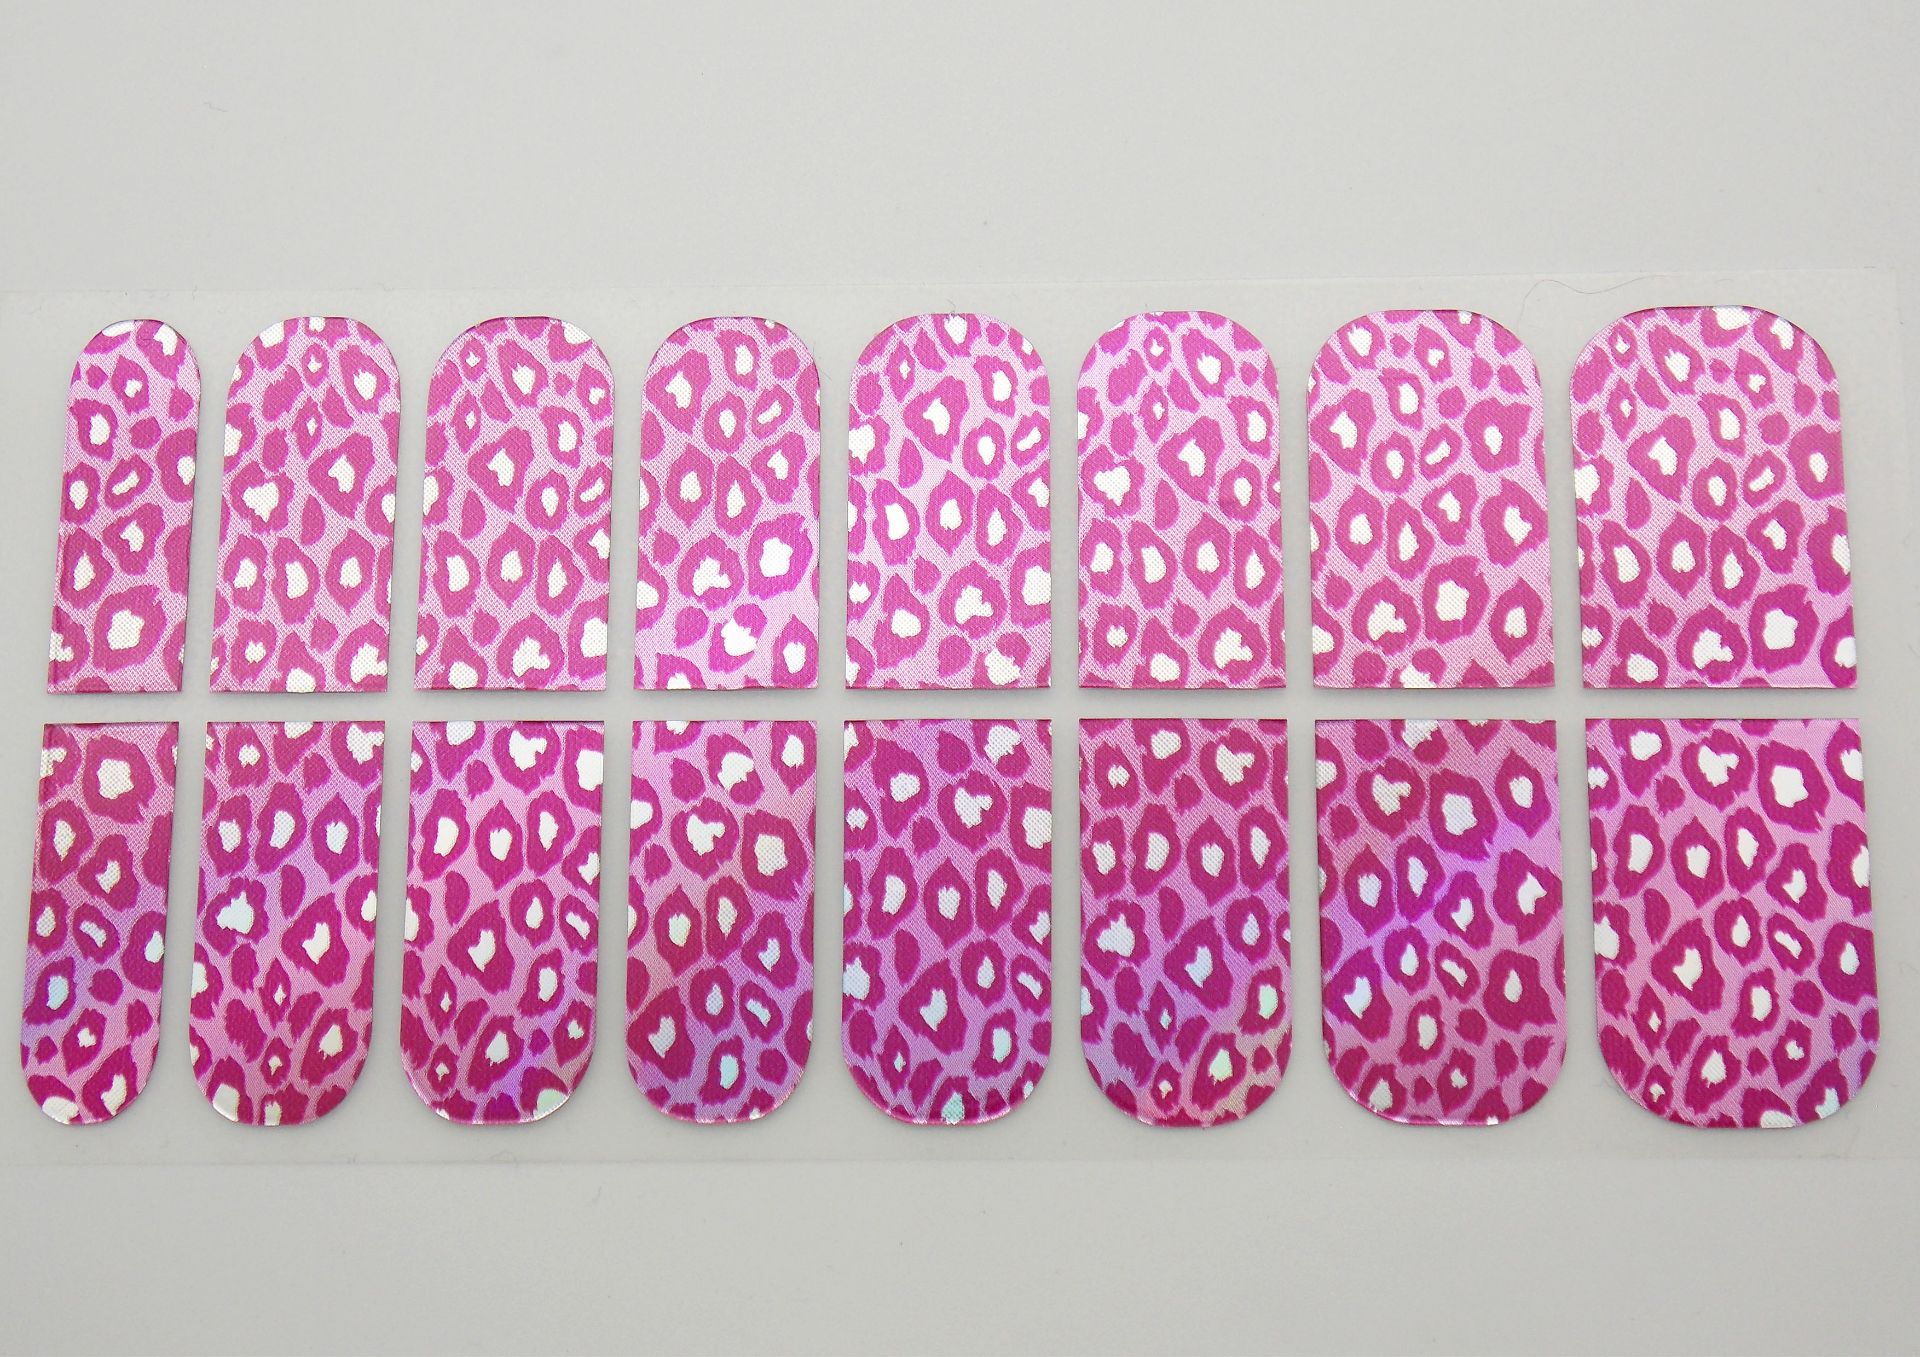 144 Packs Of Professional Nail Art Wrap Transfers - 3 Different Animal Print Styles - Image 7 of 10